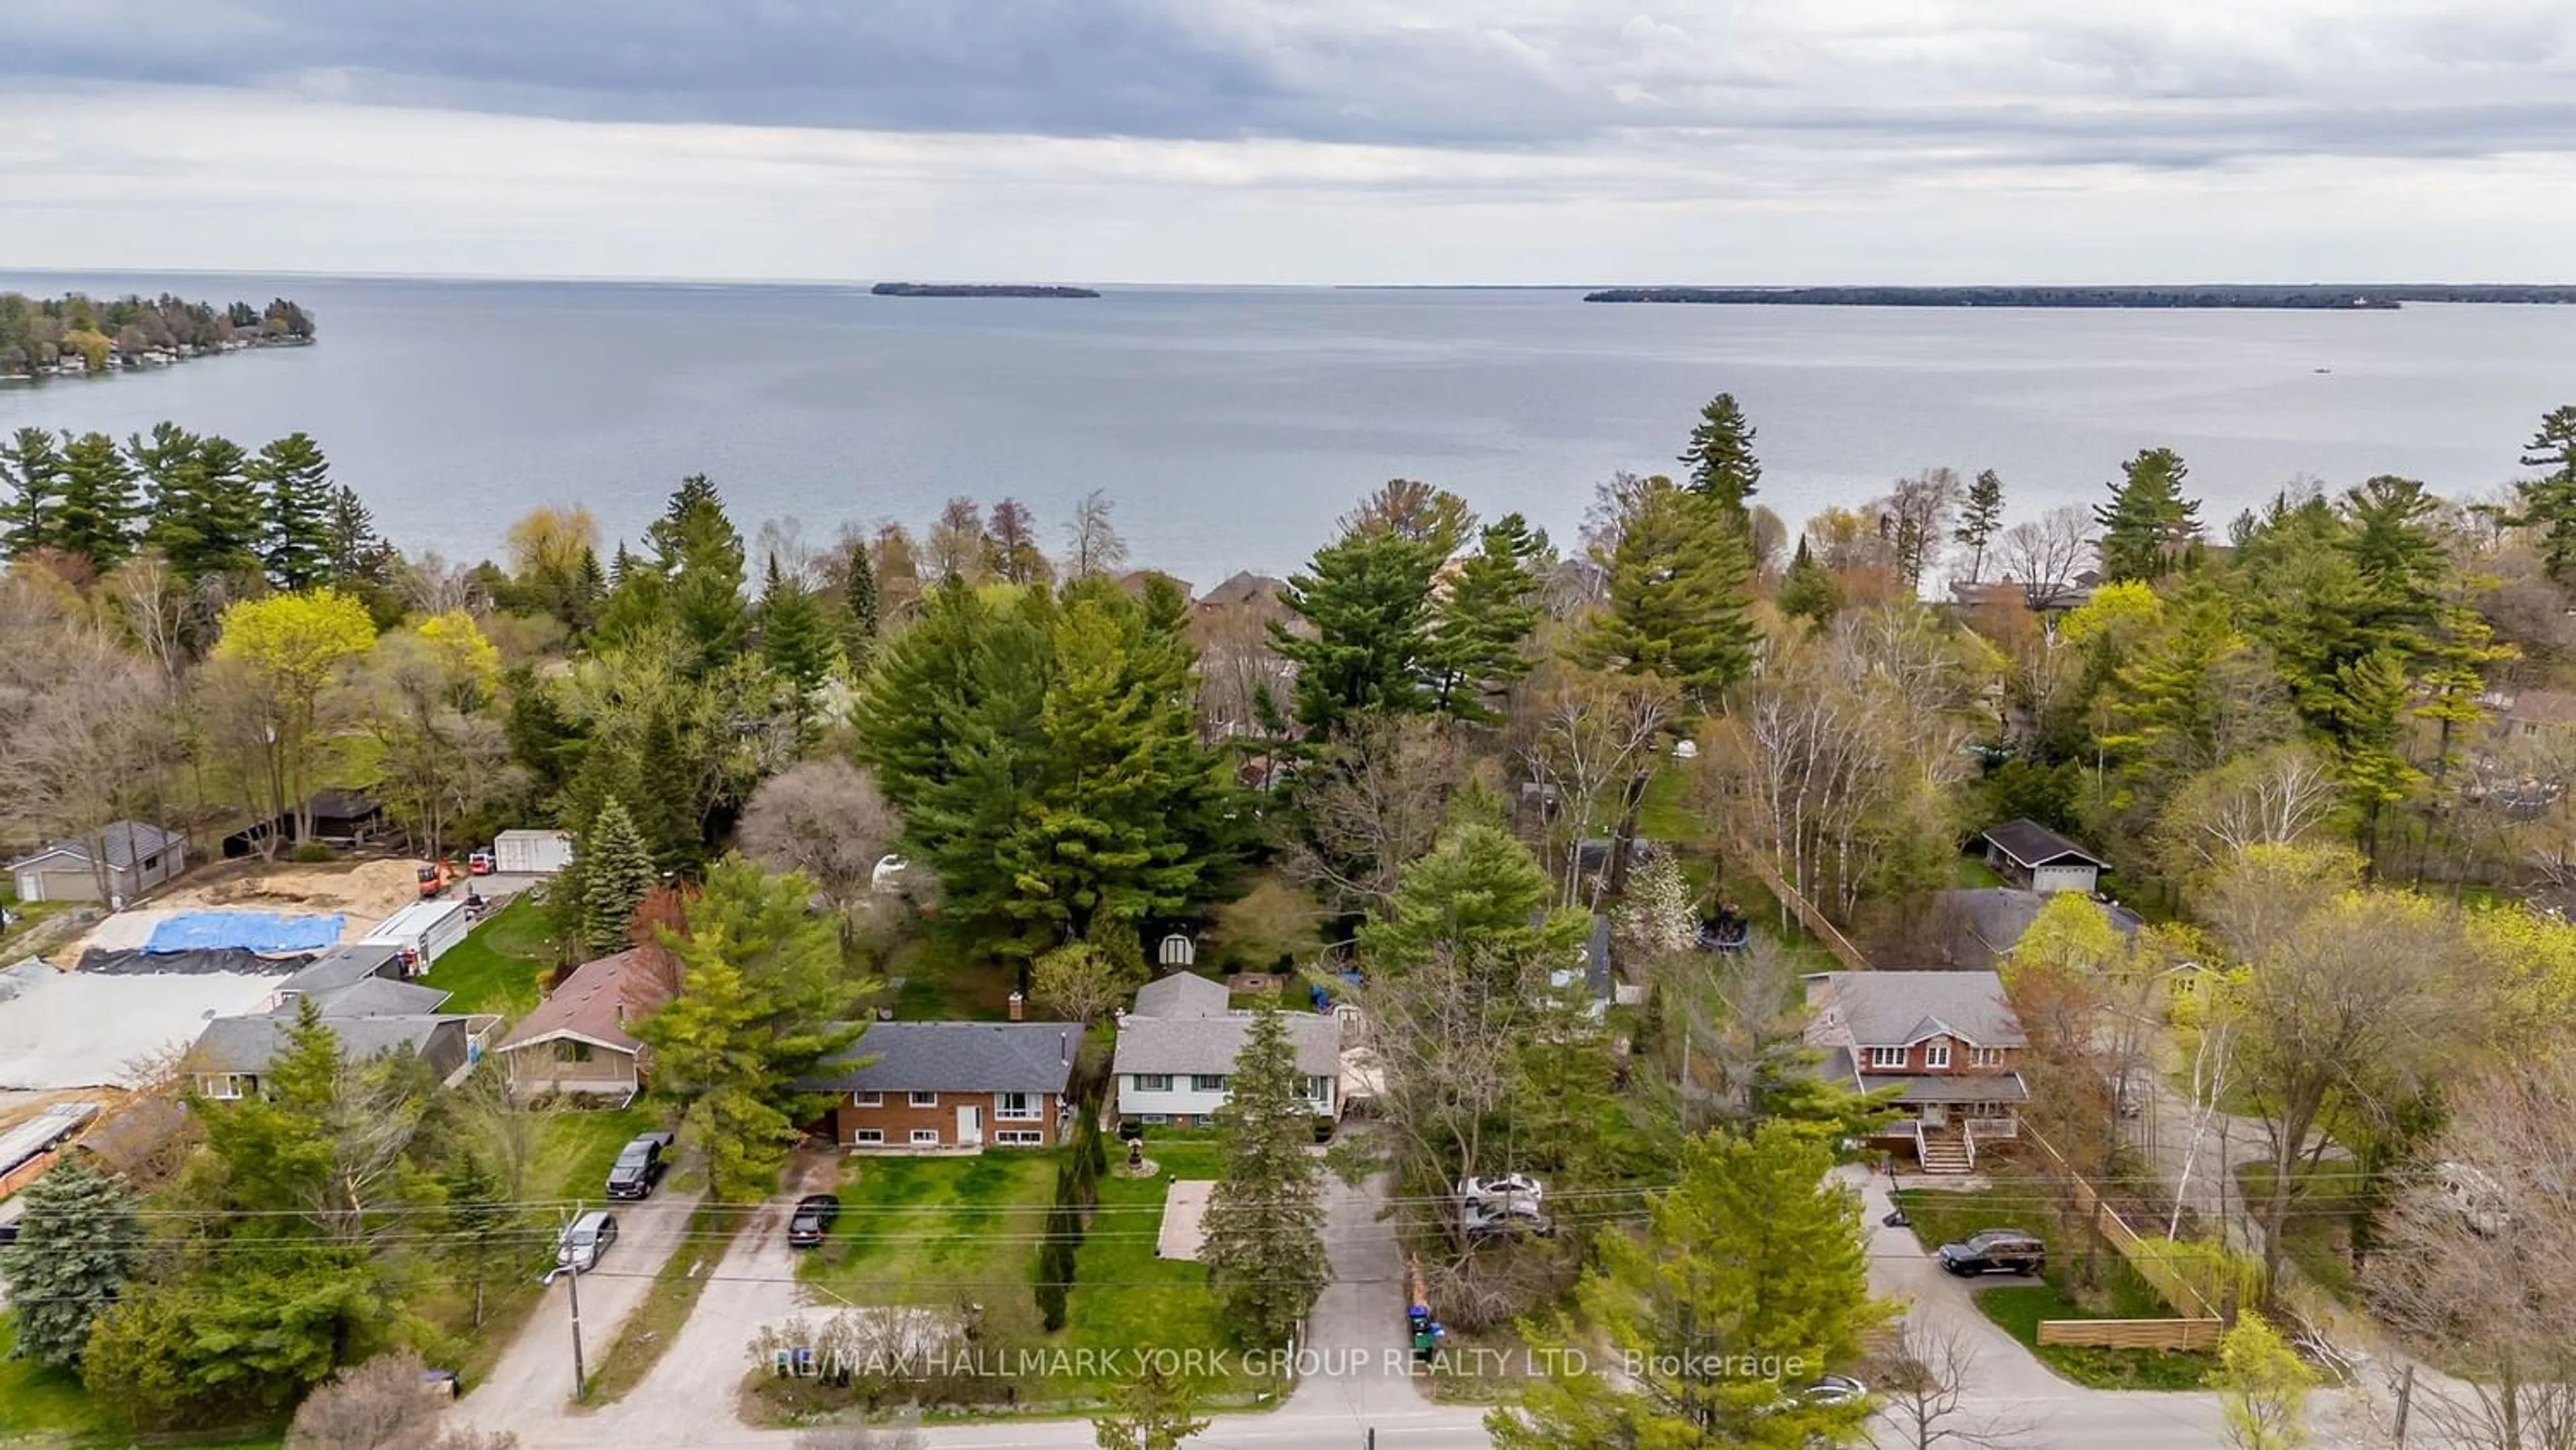 Lakeview for 1833 St John's Rd, Innisfil Ontario L9S 1T4